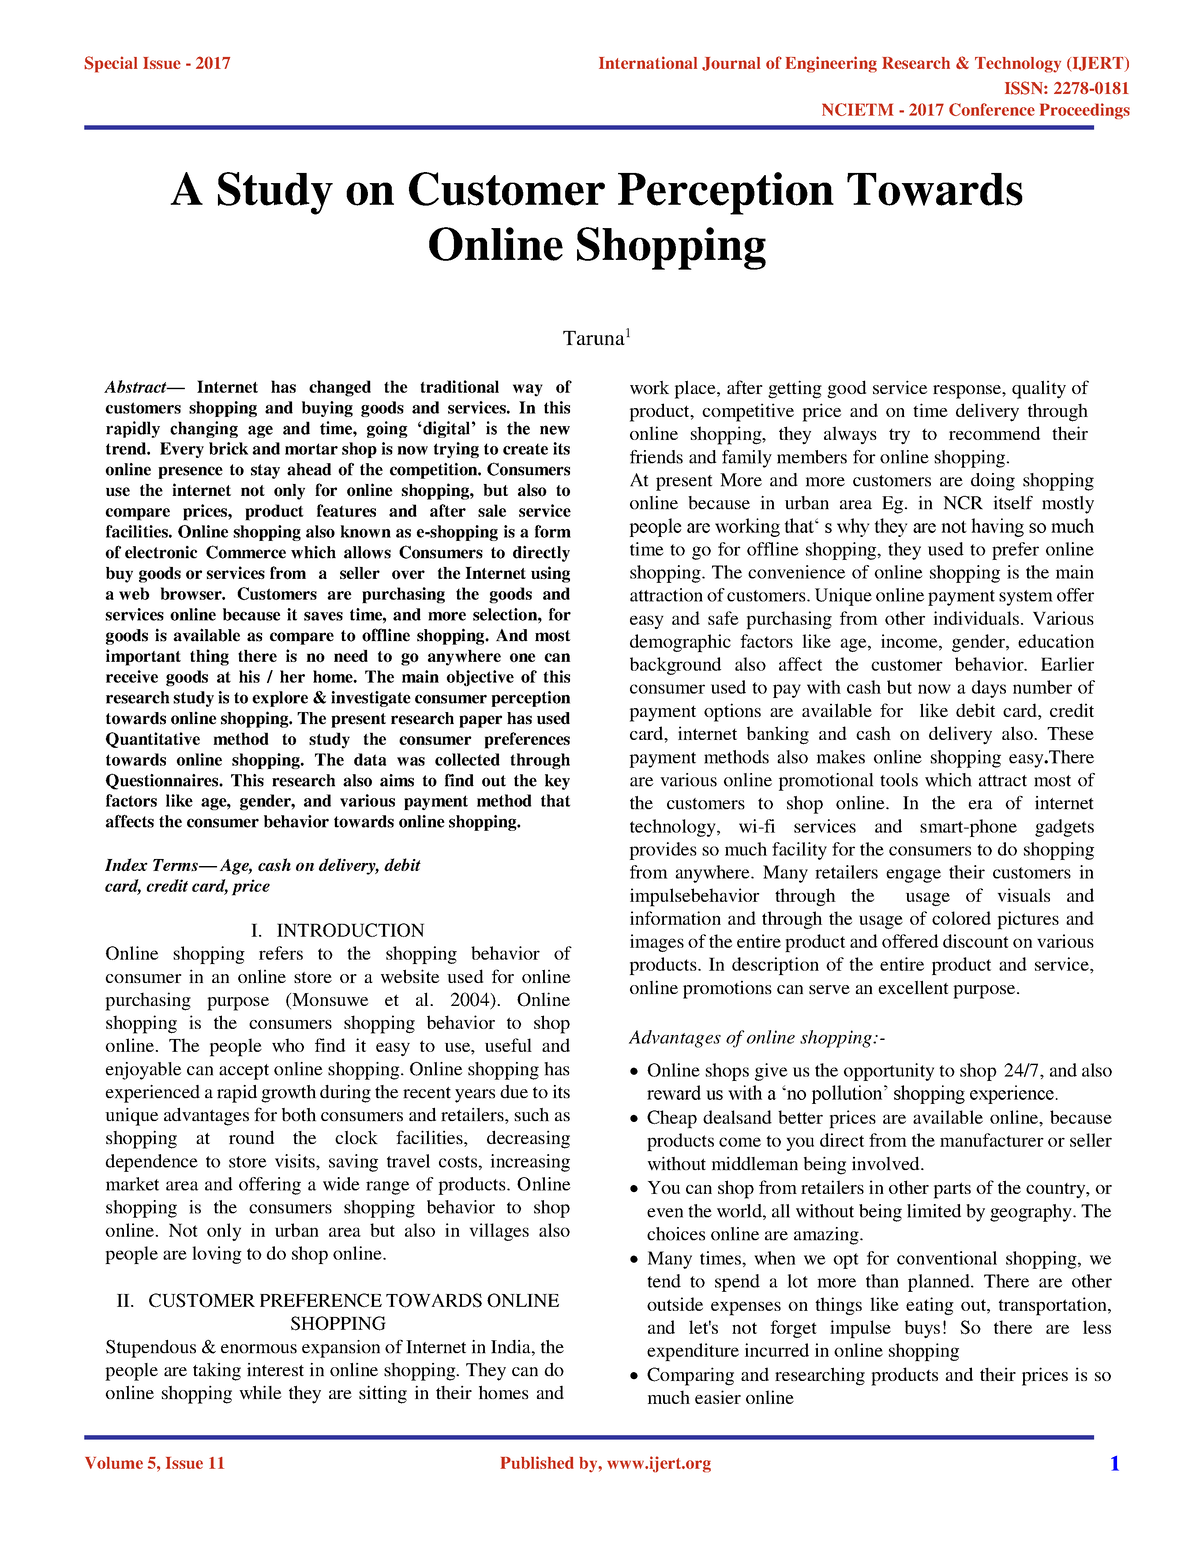 customer satisfaction towards online shopping research paper